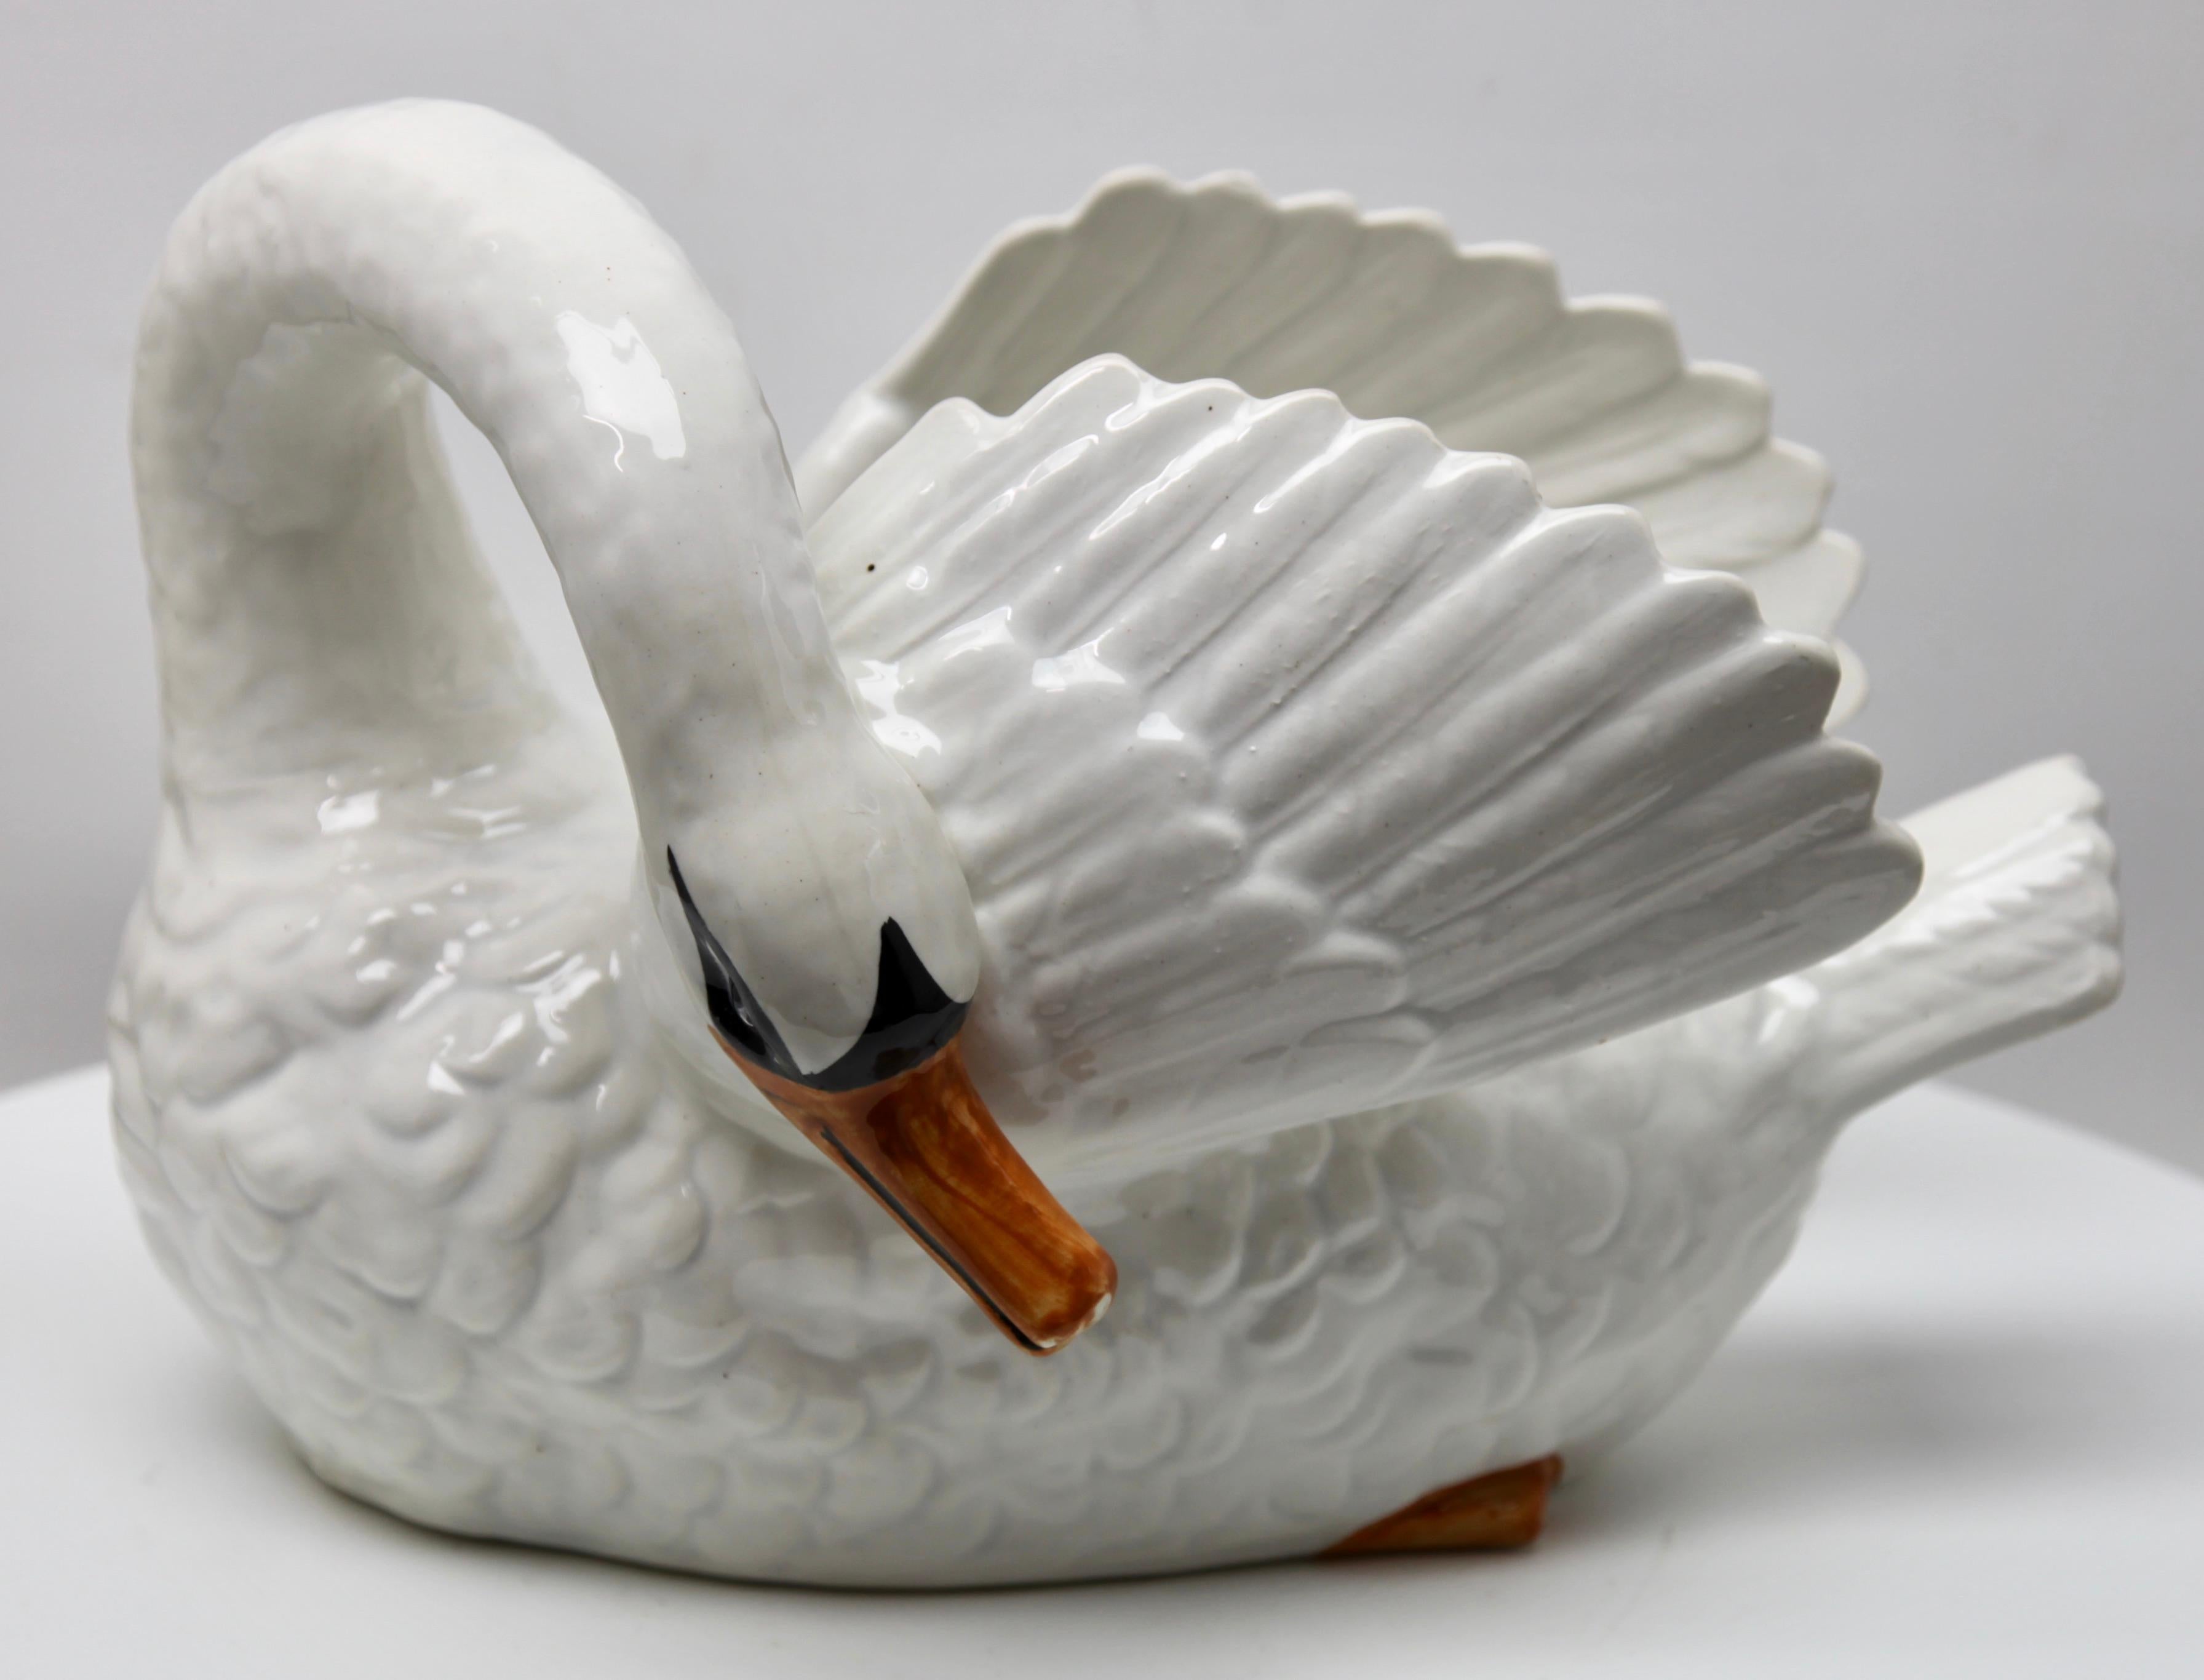 Majolica white swan jardinière Nimy, circa 1900.

Stamped: Nimy Faiences Imperial from 1789-1951 Belgium.
A real treasure for the ceramics' collector.

With best wishes,